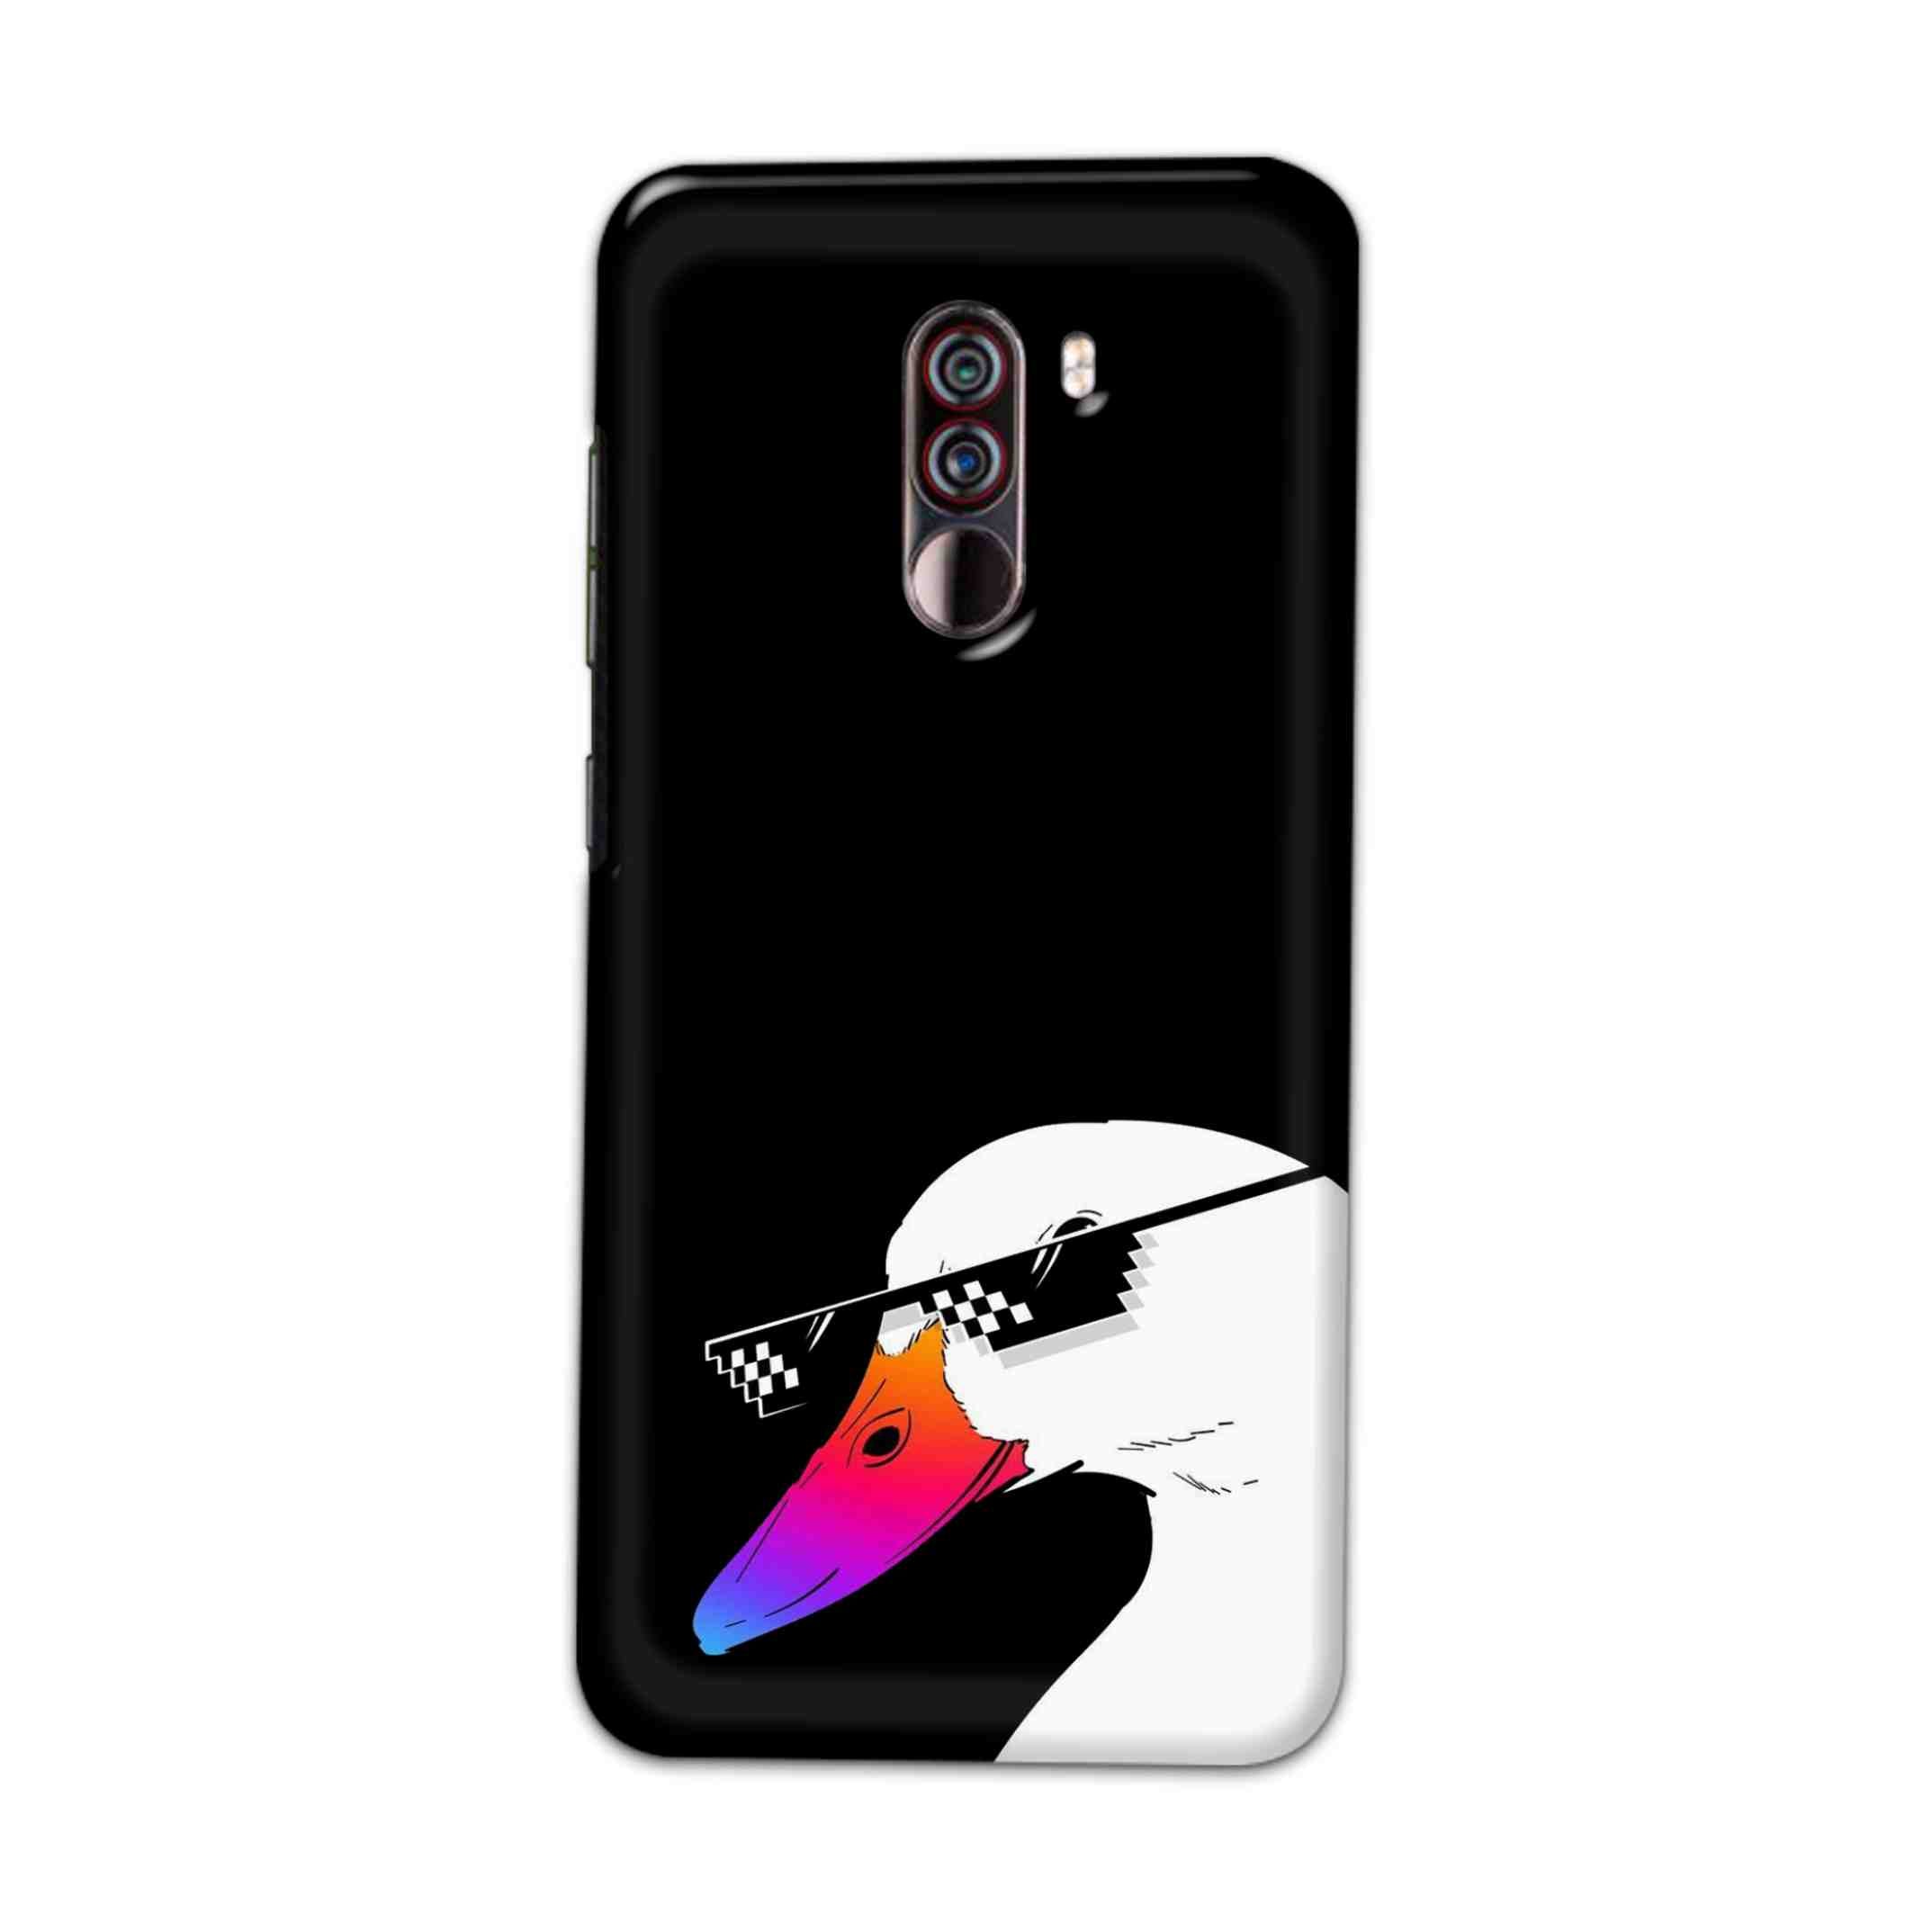 Buy Neon Duck Hard Back Mobile Phone Case Cover For Xiaomi Pocophone F1 Online